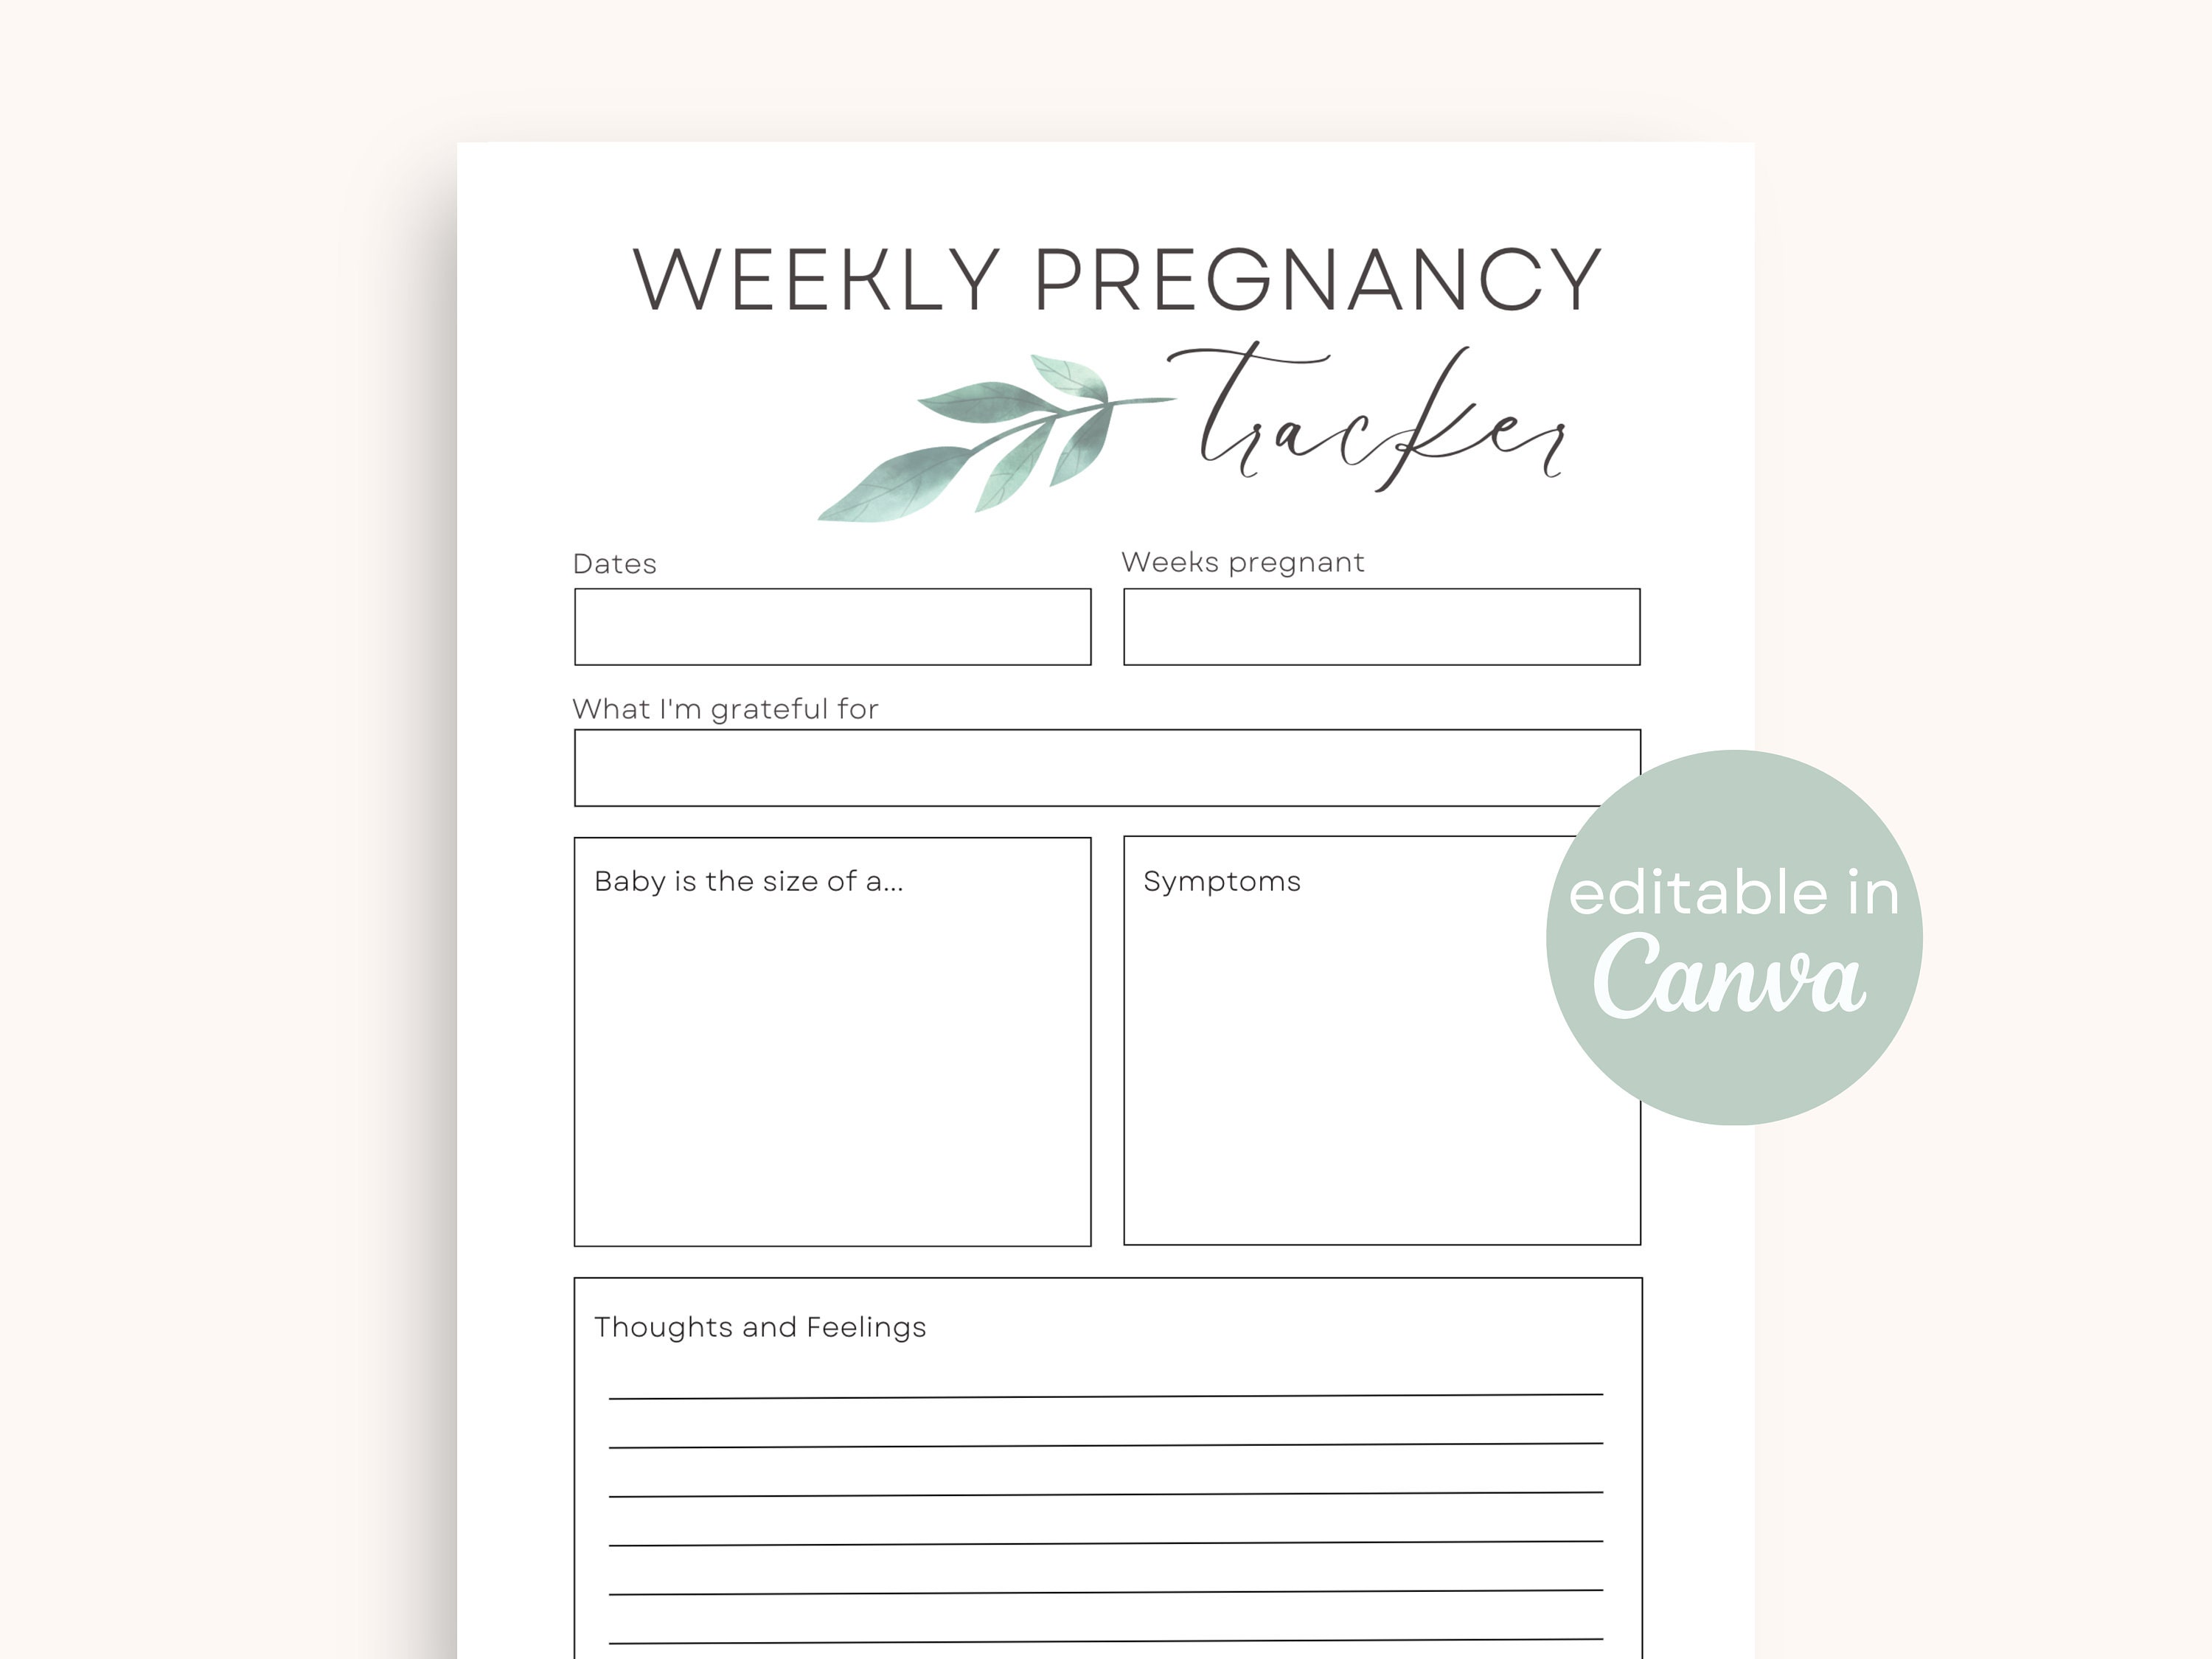 Weekly Pregnancy Signs, Baby Size Compared to Animals, Weeks 6-41, INSTANT  DOWNLOAD Printable 8x10 Signs, Maternity, Pregnancy Countdown 